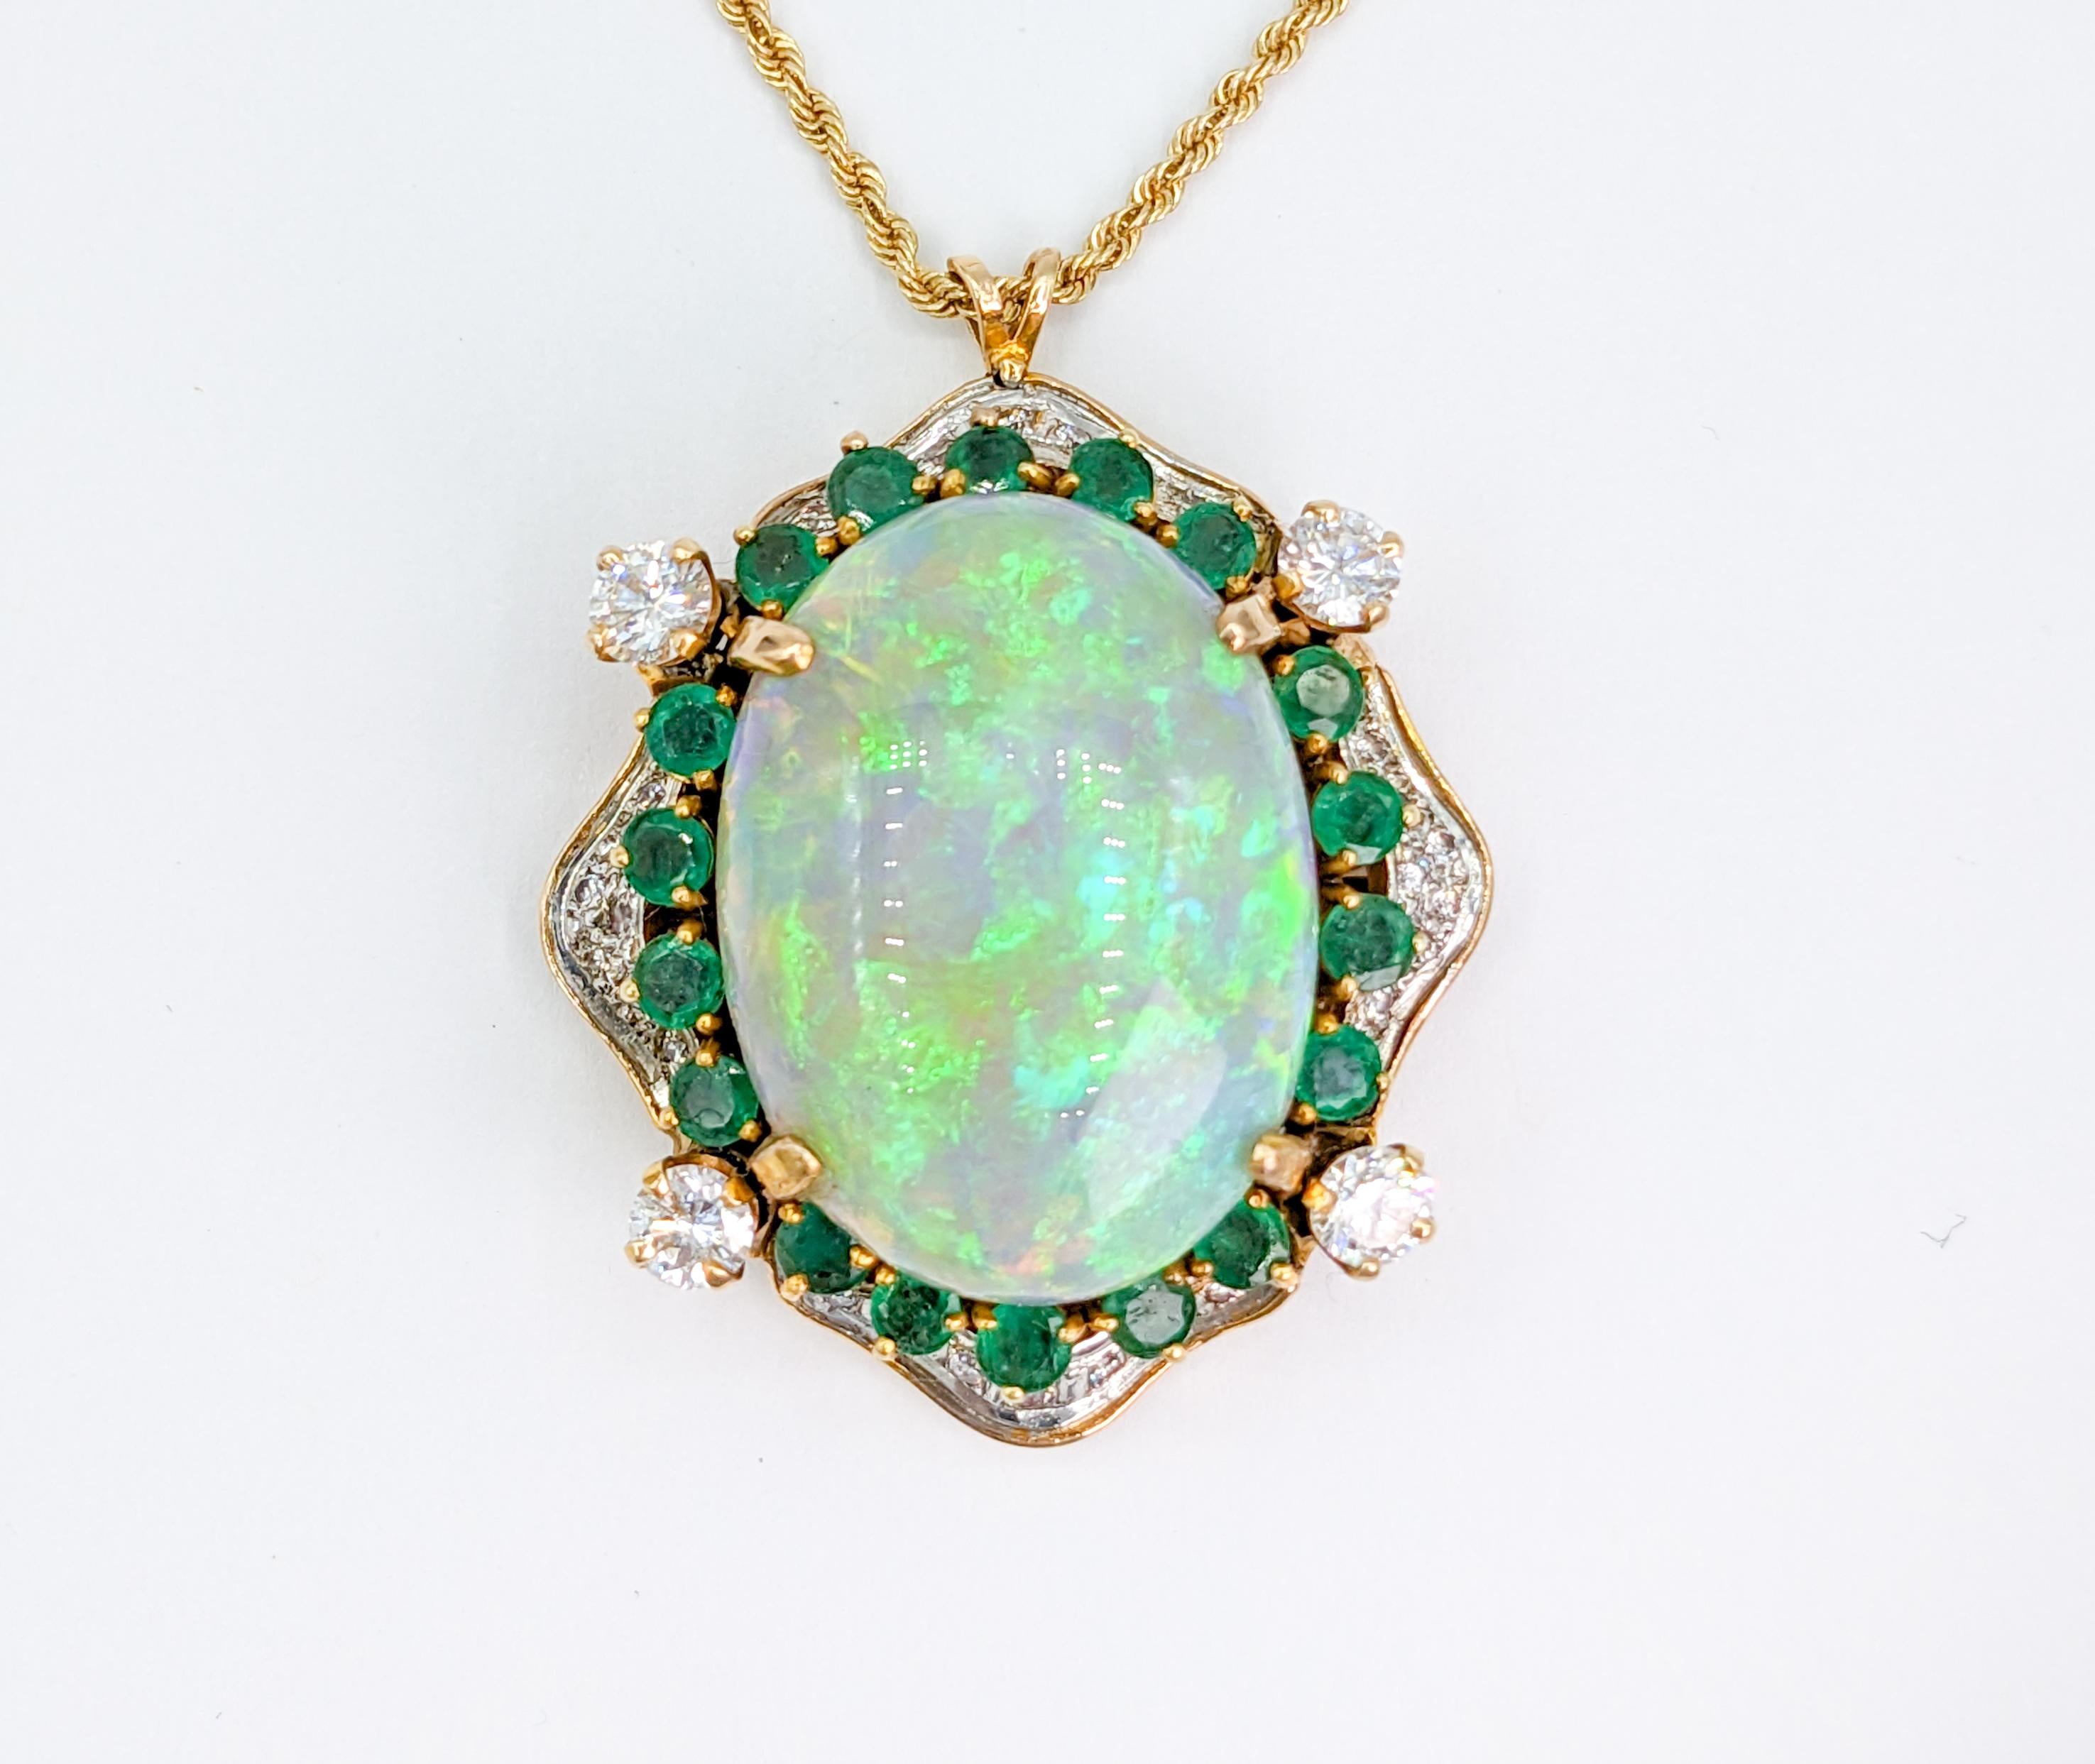 Heirloom Statement Opal, Diamond & Emerald Yellow Gold Pendant

Experience the allure of this stunning Pendant, beautifully designed in 14 karat yellow gold. It spotlights an impressive 1.25 carat total weight of Round Diamonds that glimmer with